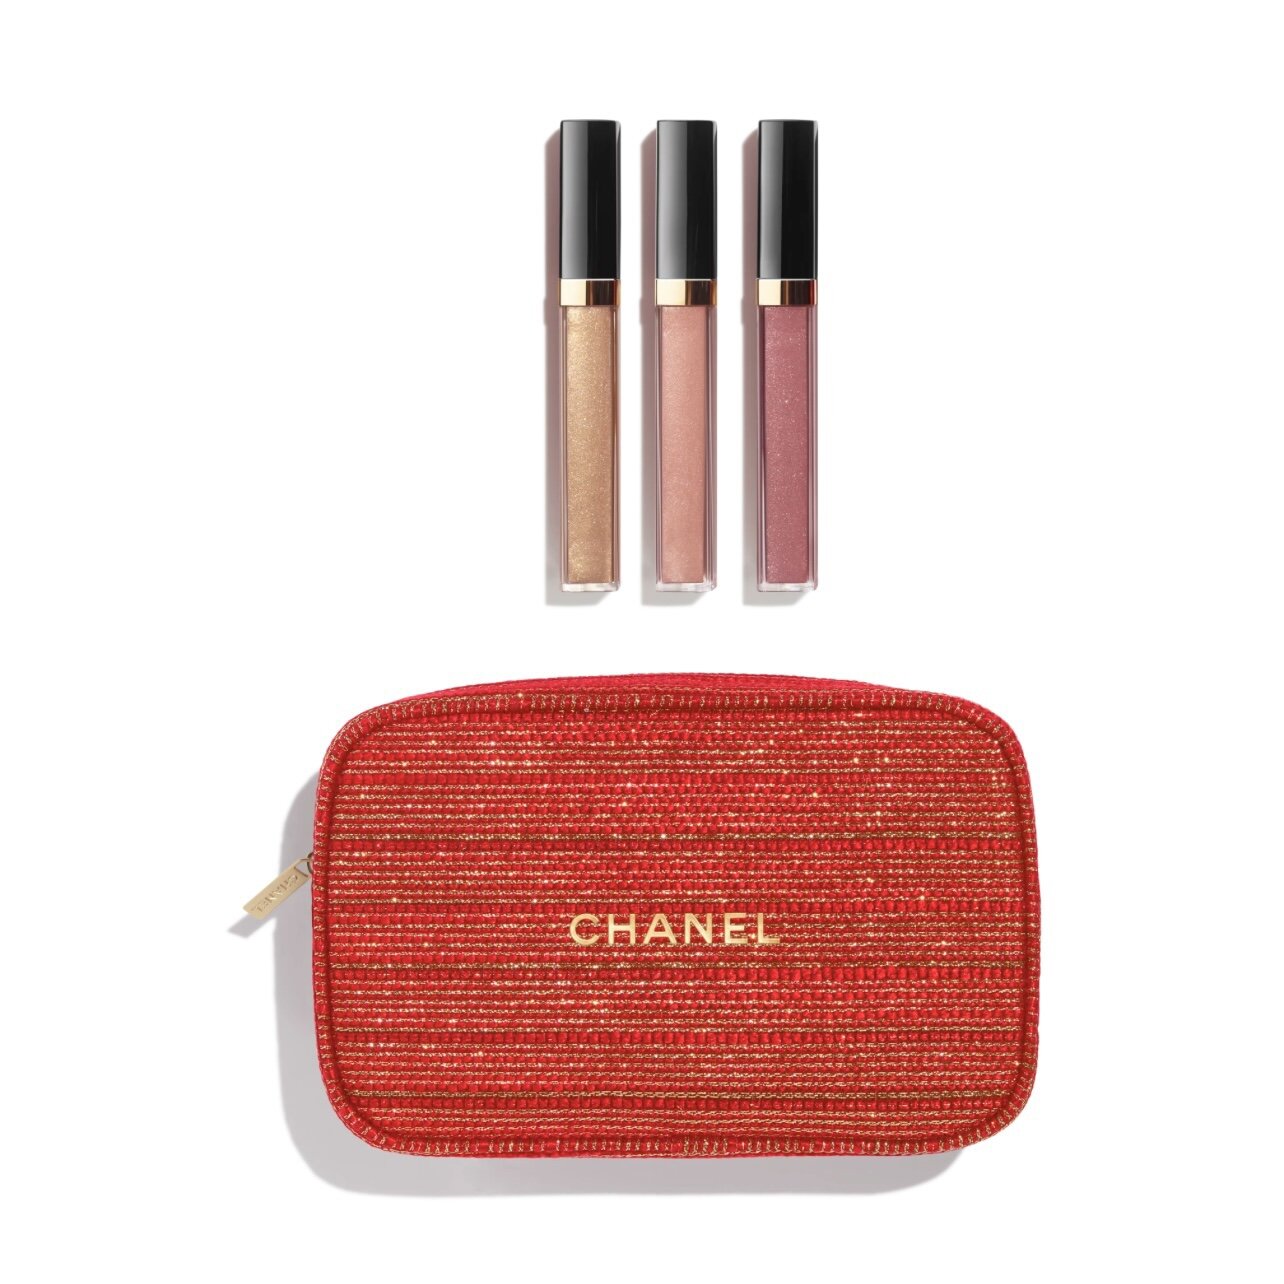 The 2023 CHANEL Beauty Holiday Gift Sets Are Here